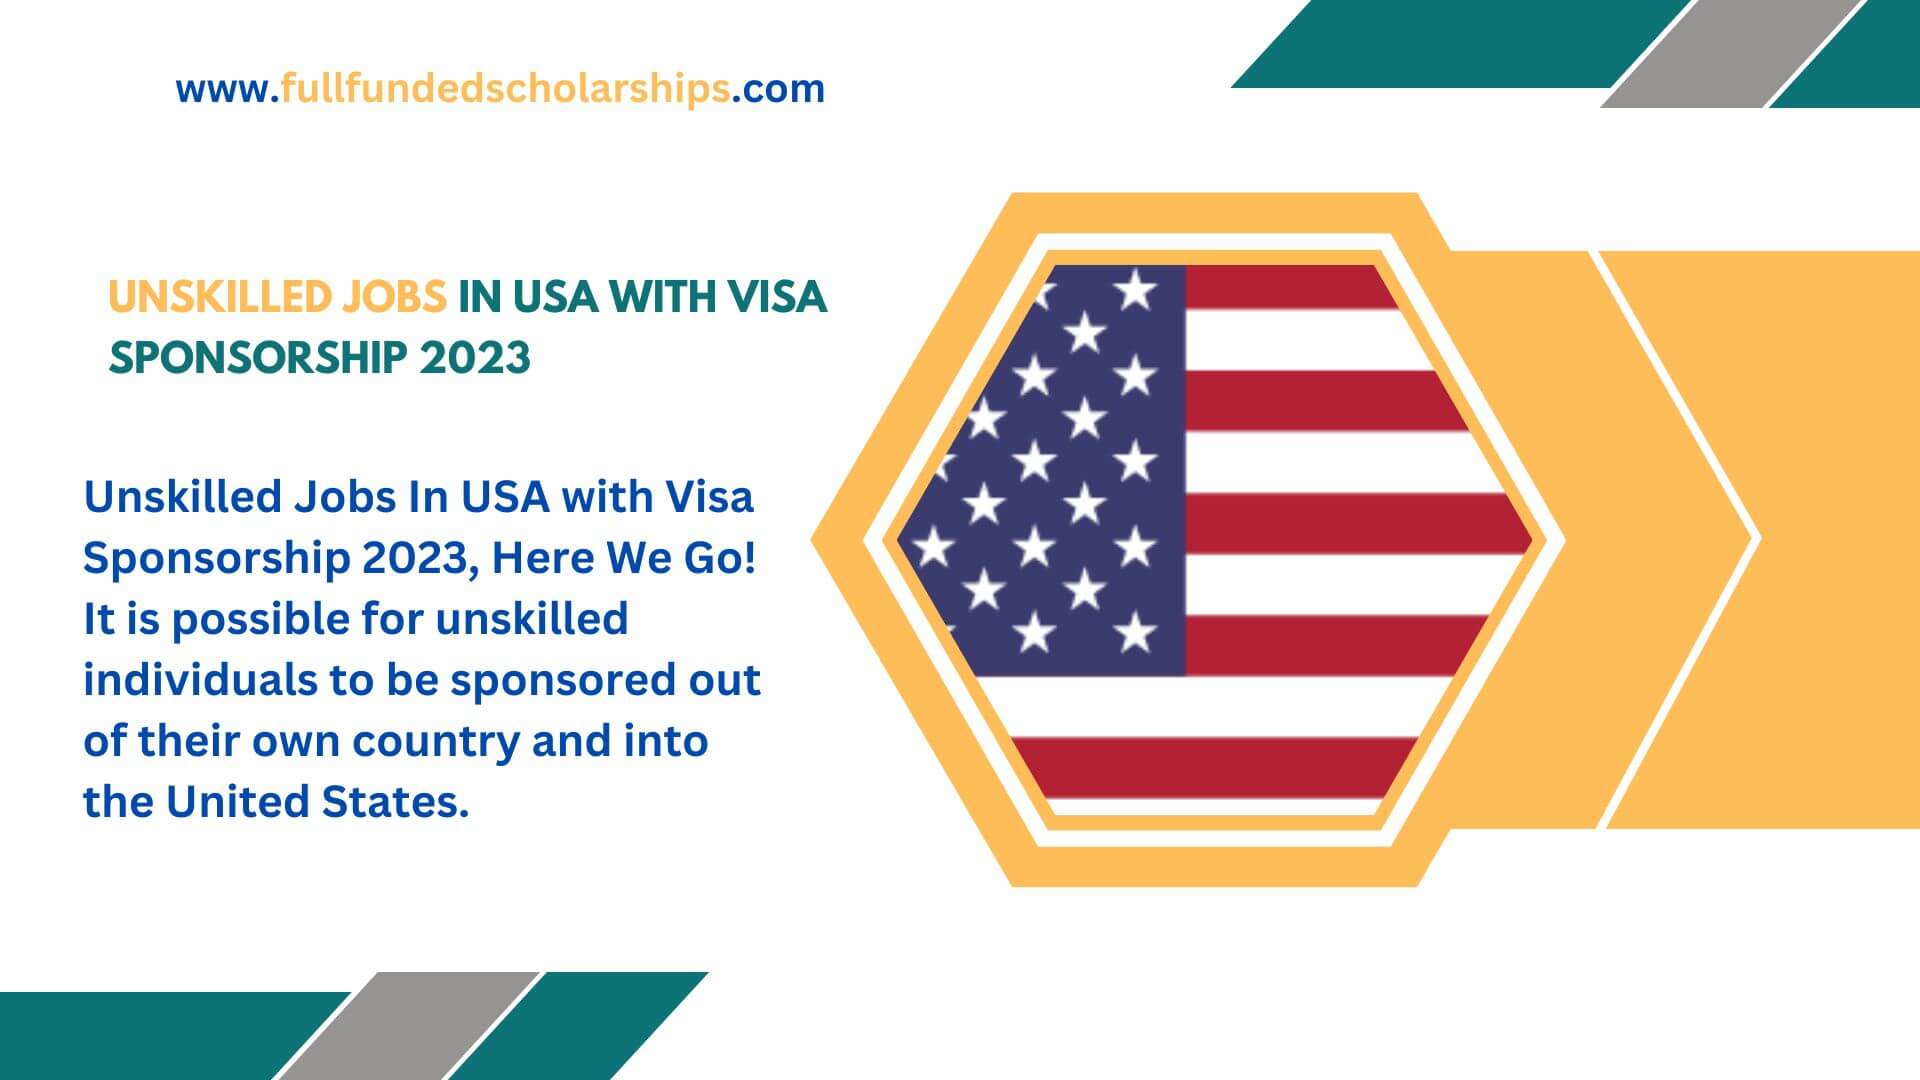 Unskilled Jobs In USA with Visa Sponsorship 2023 